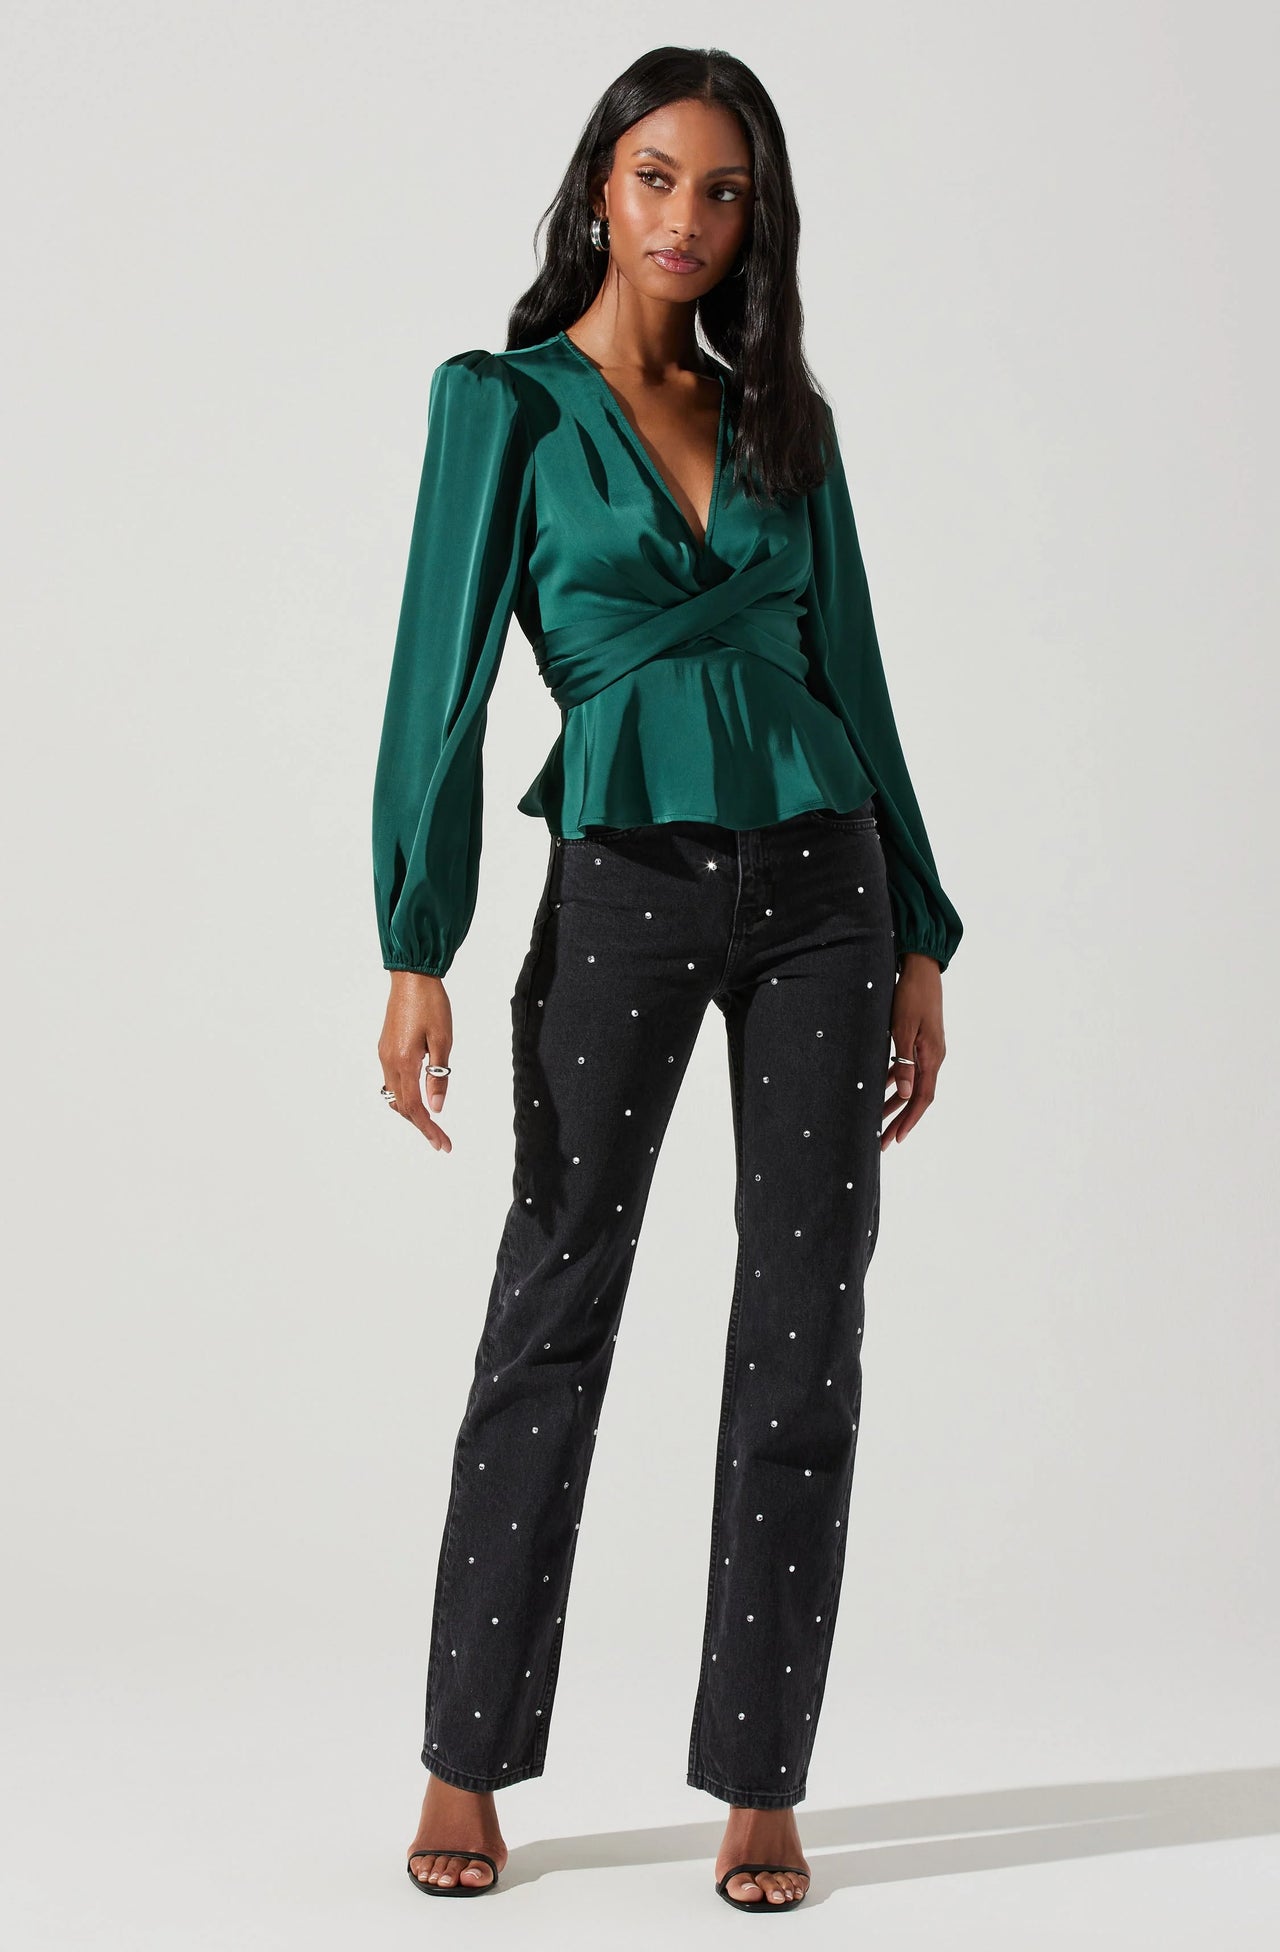 Arianae Top - High Neck Top in Forest Green